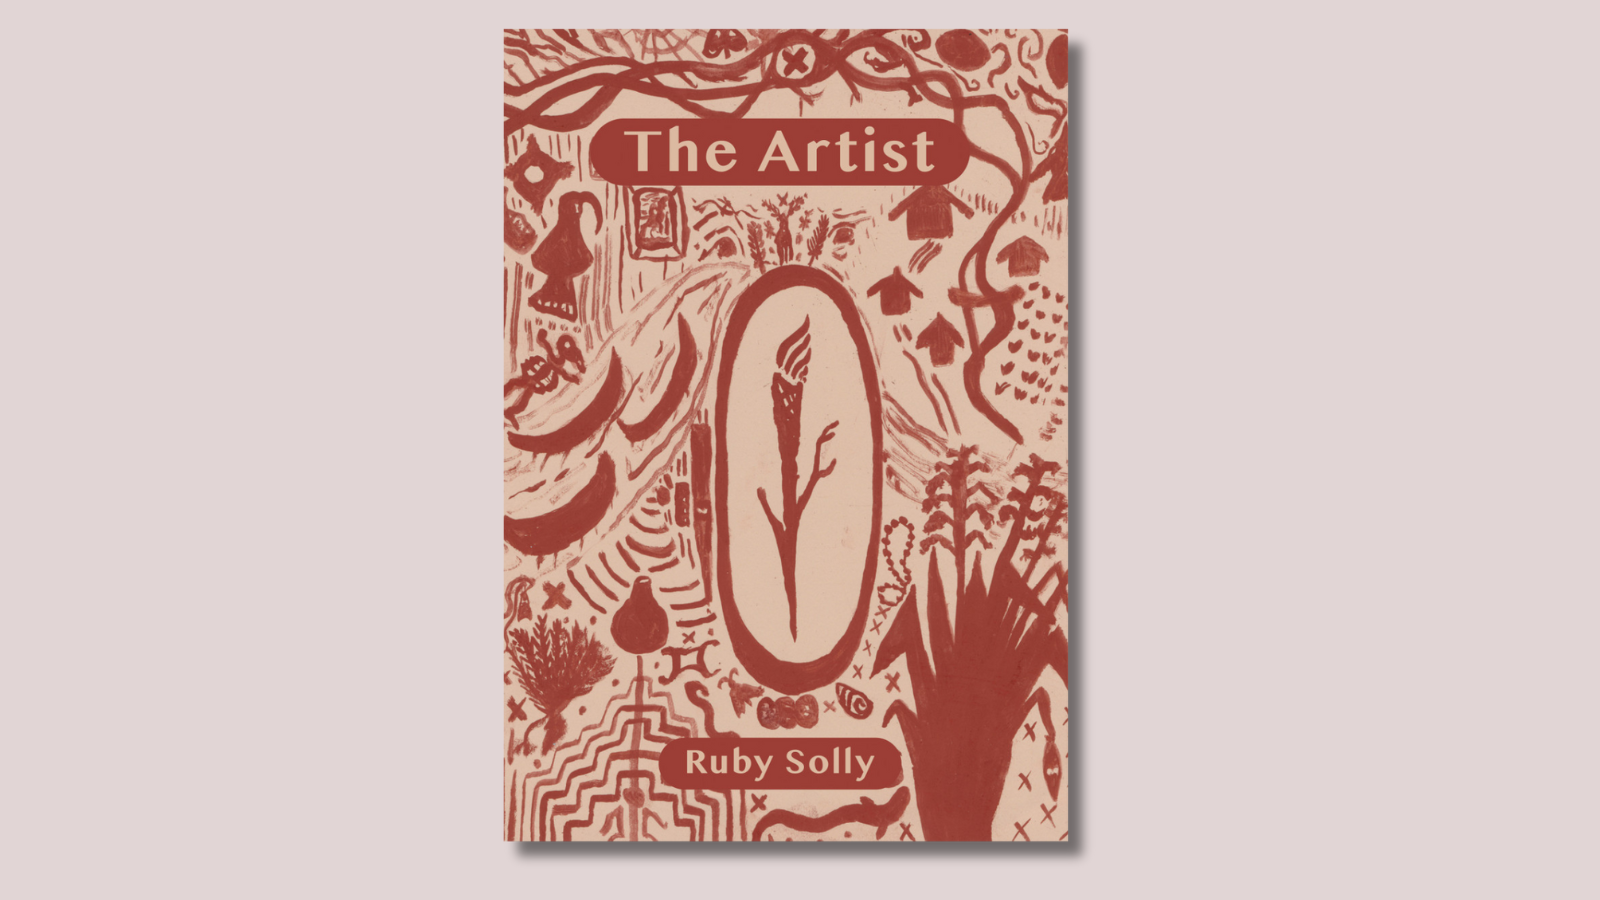 The Artist by Ruby Solly